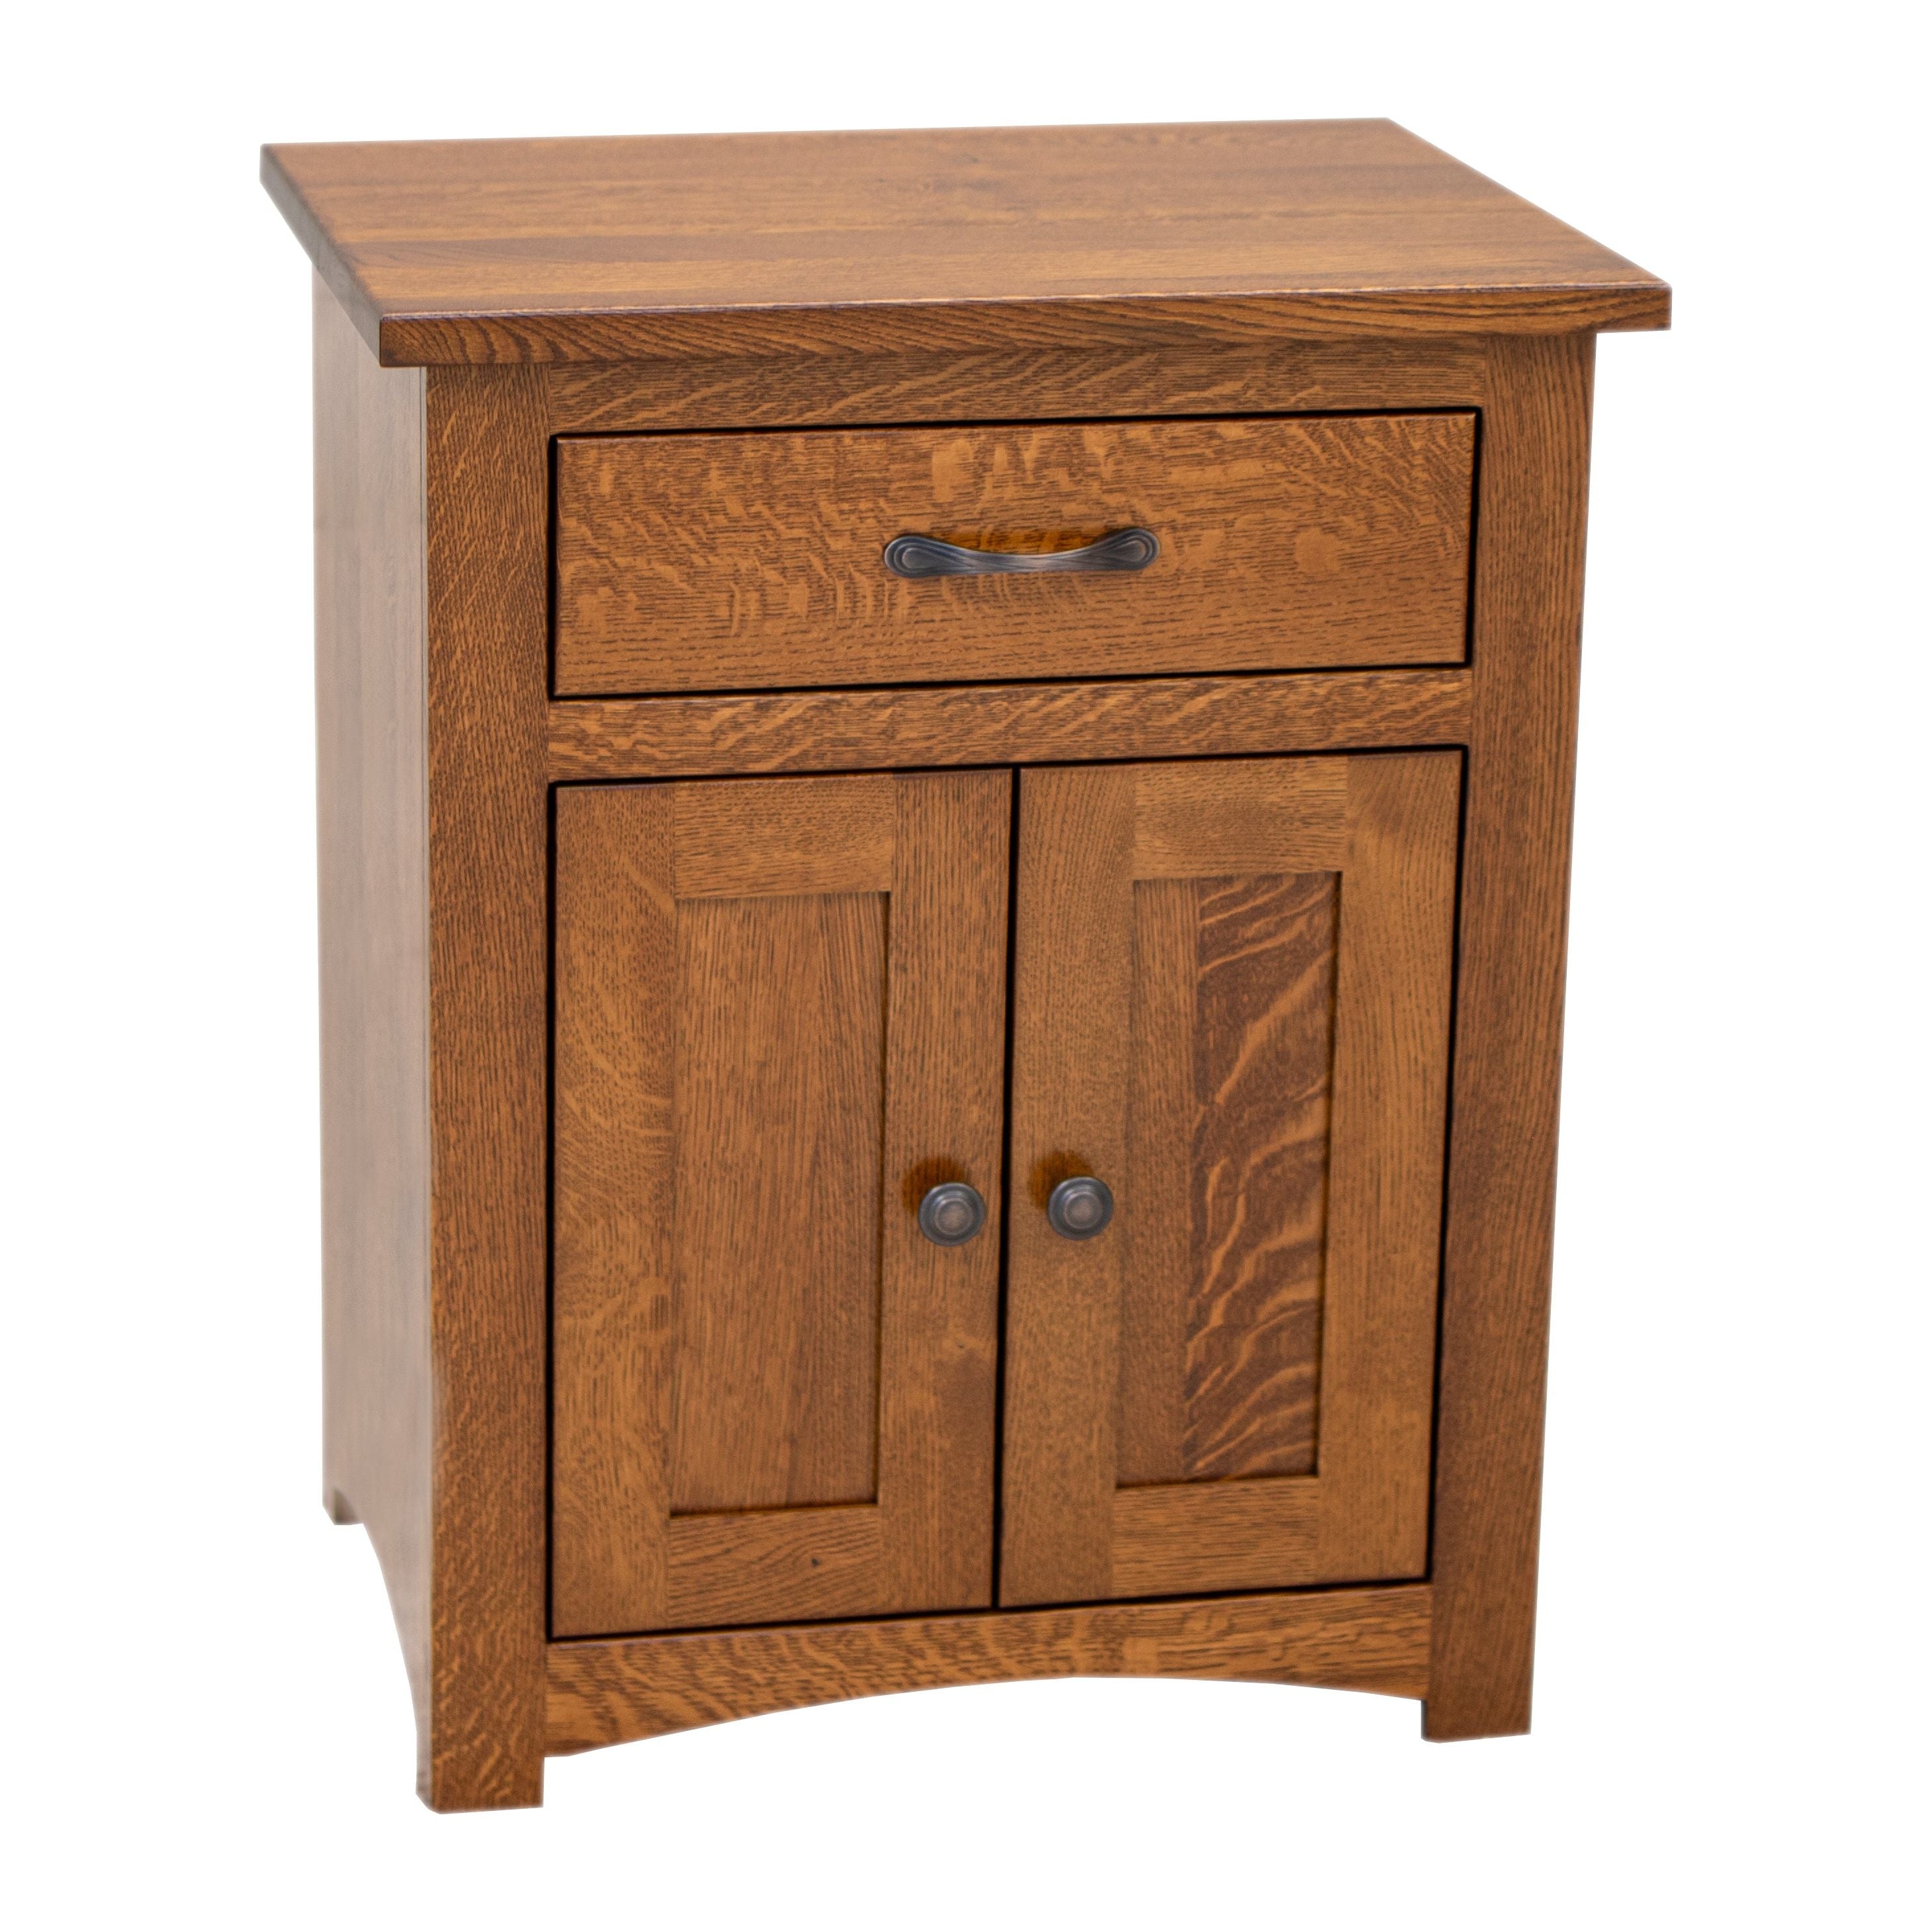 Lavina Shaker Night Stand from DutchCrafters Amish Furniture